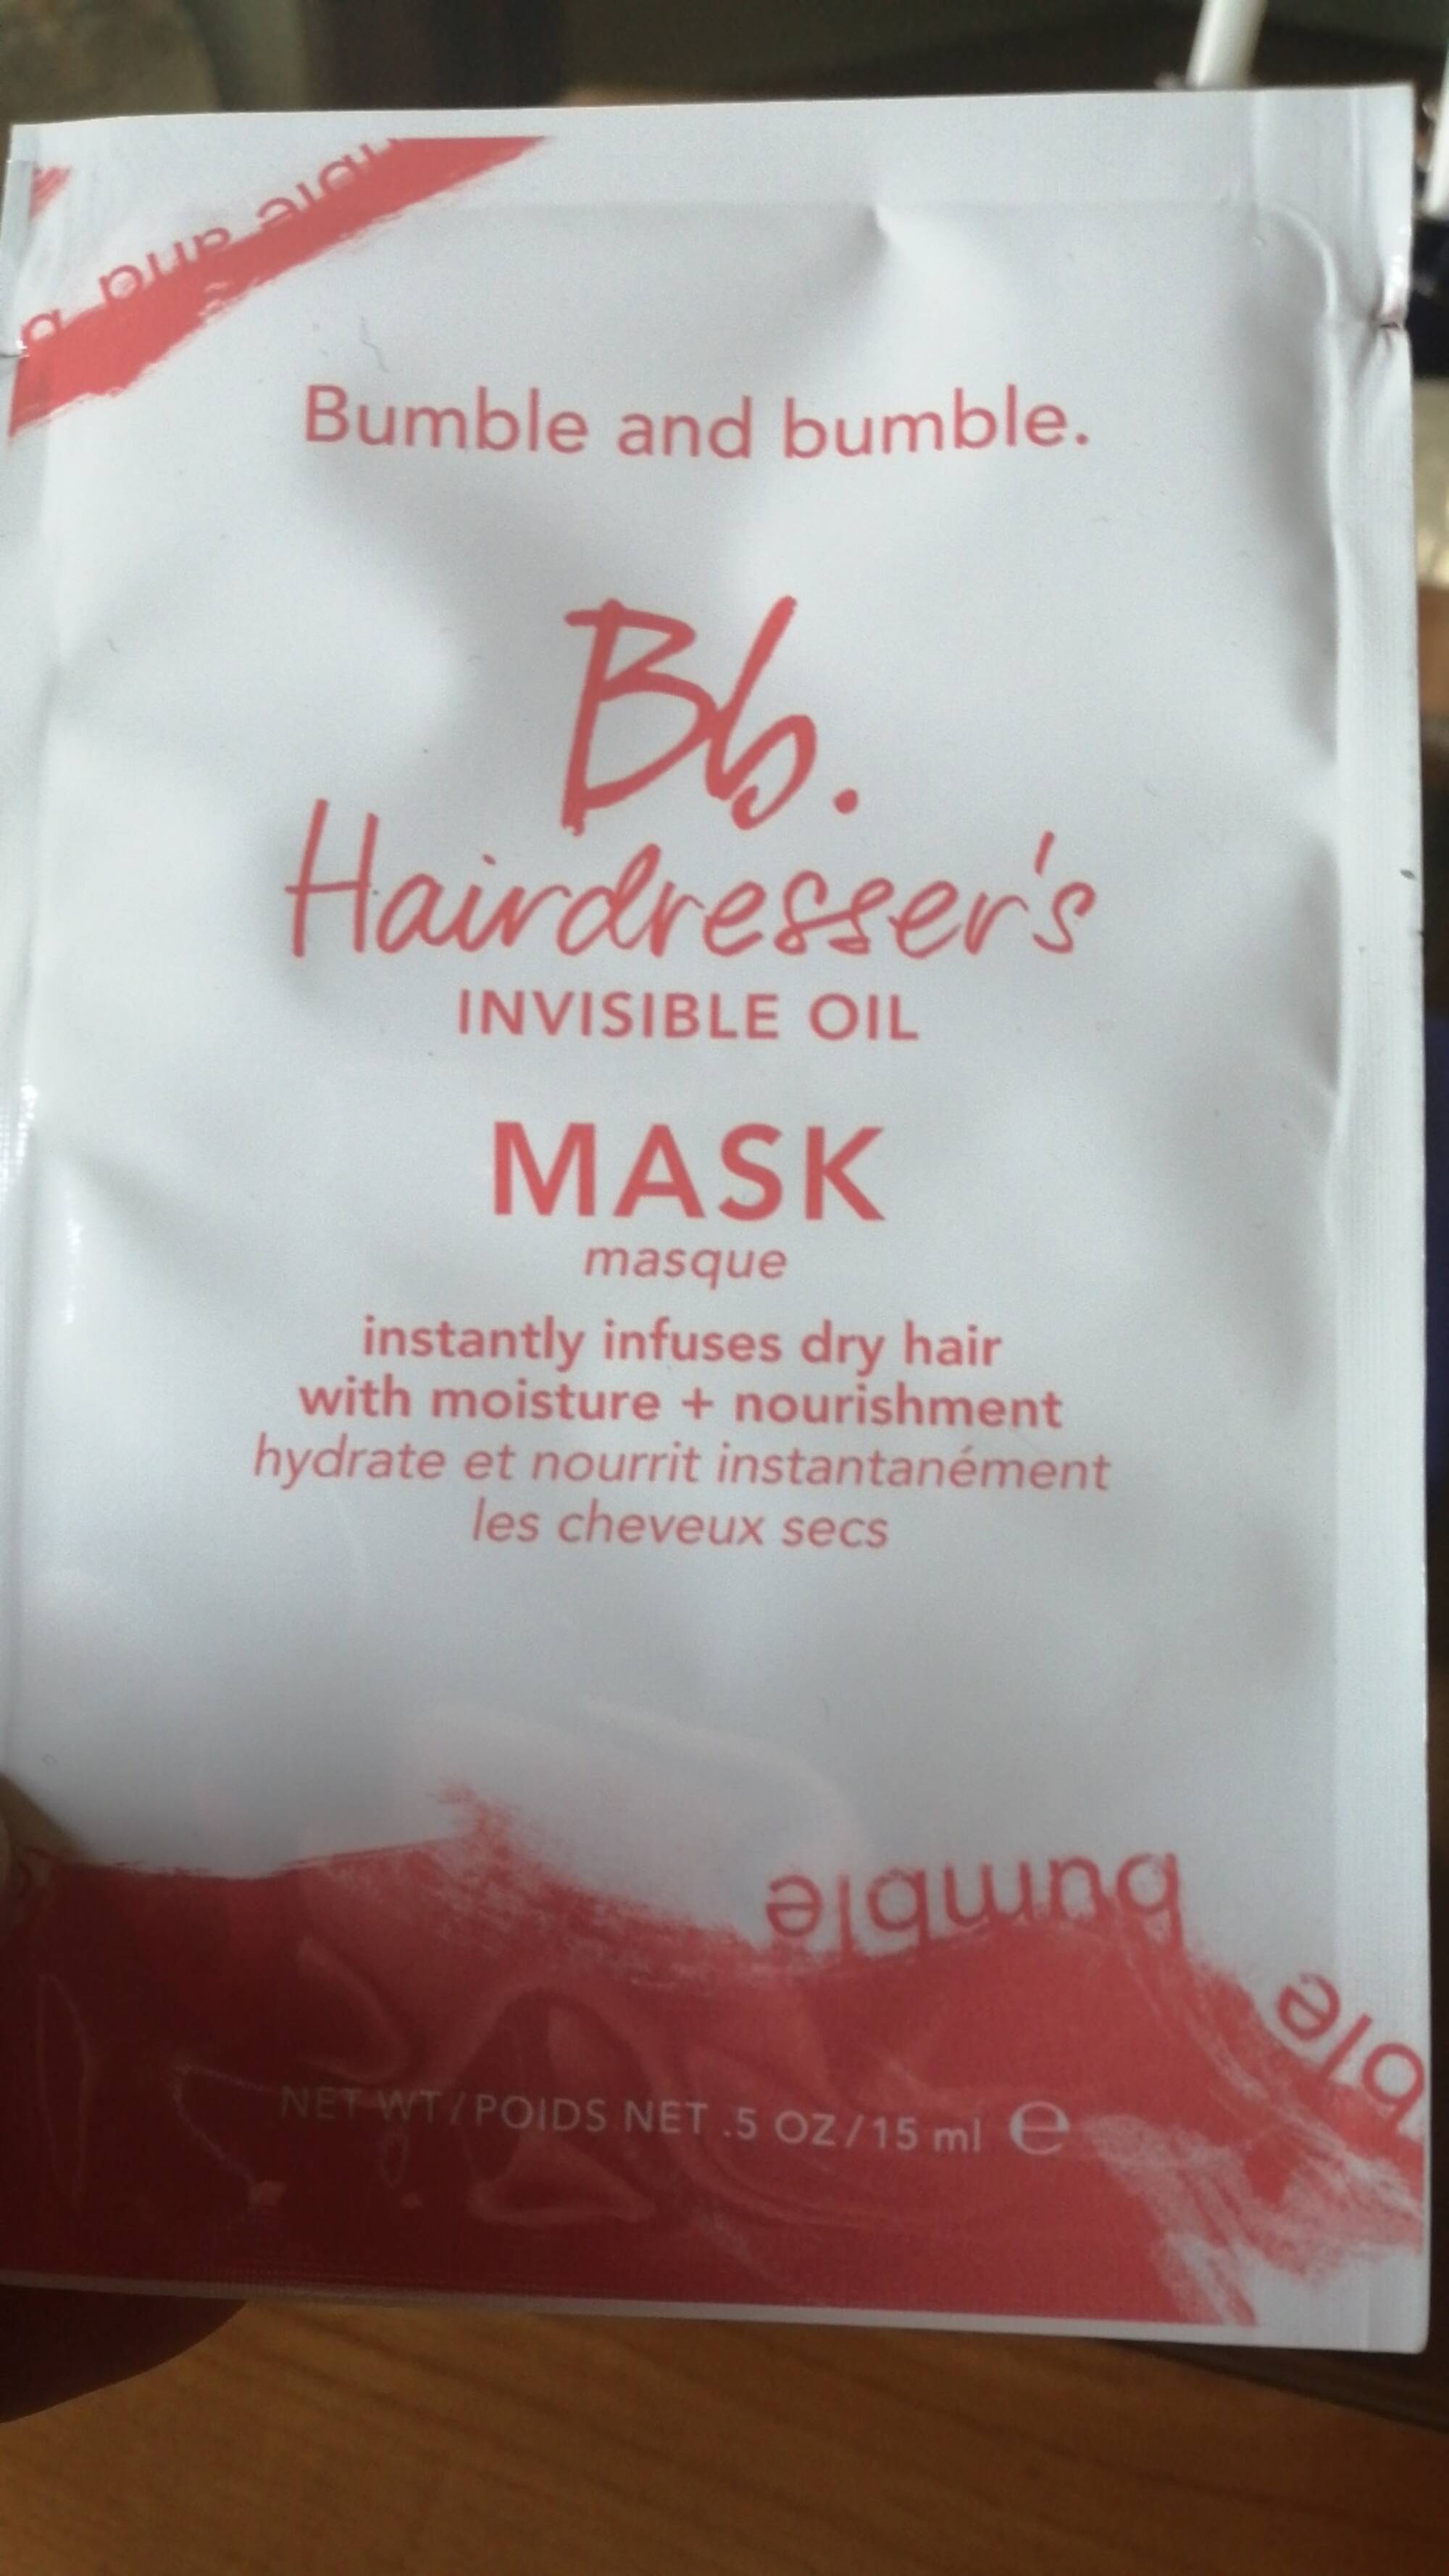 BUMBLE AND BUMBLE - Hairdresser's invisible oil - Masque